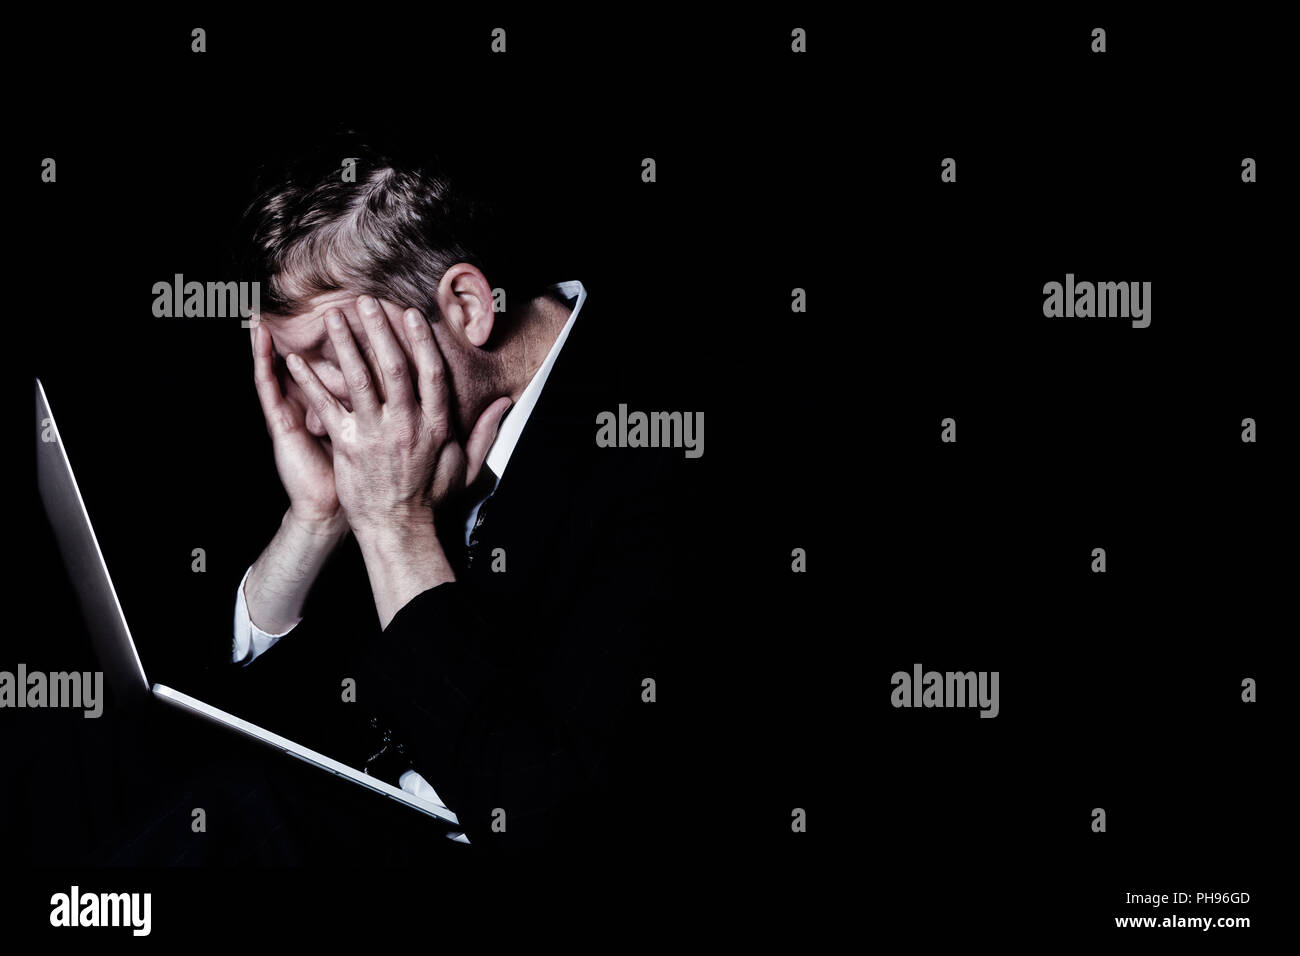 Heavily stressed man at work in the darkness Stock Photo